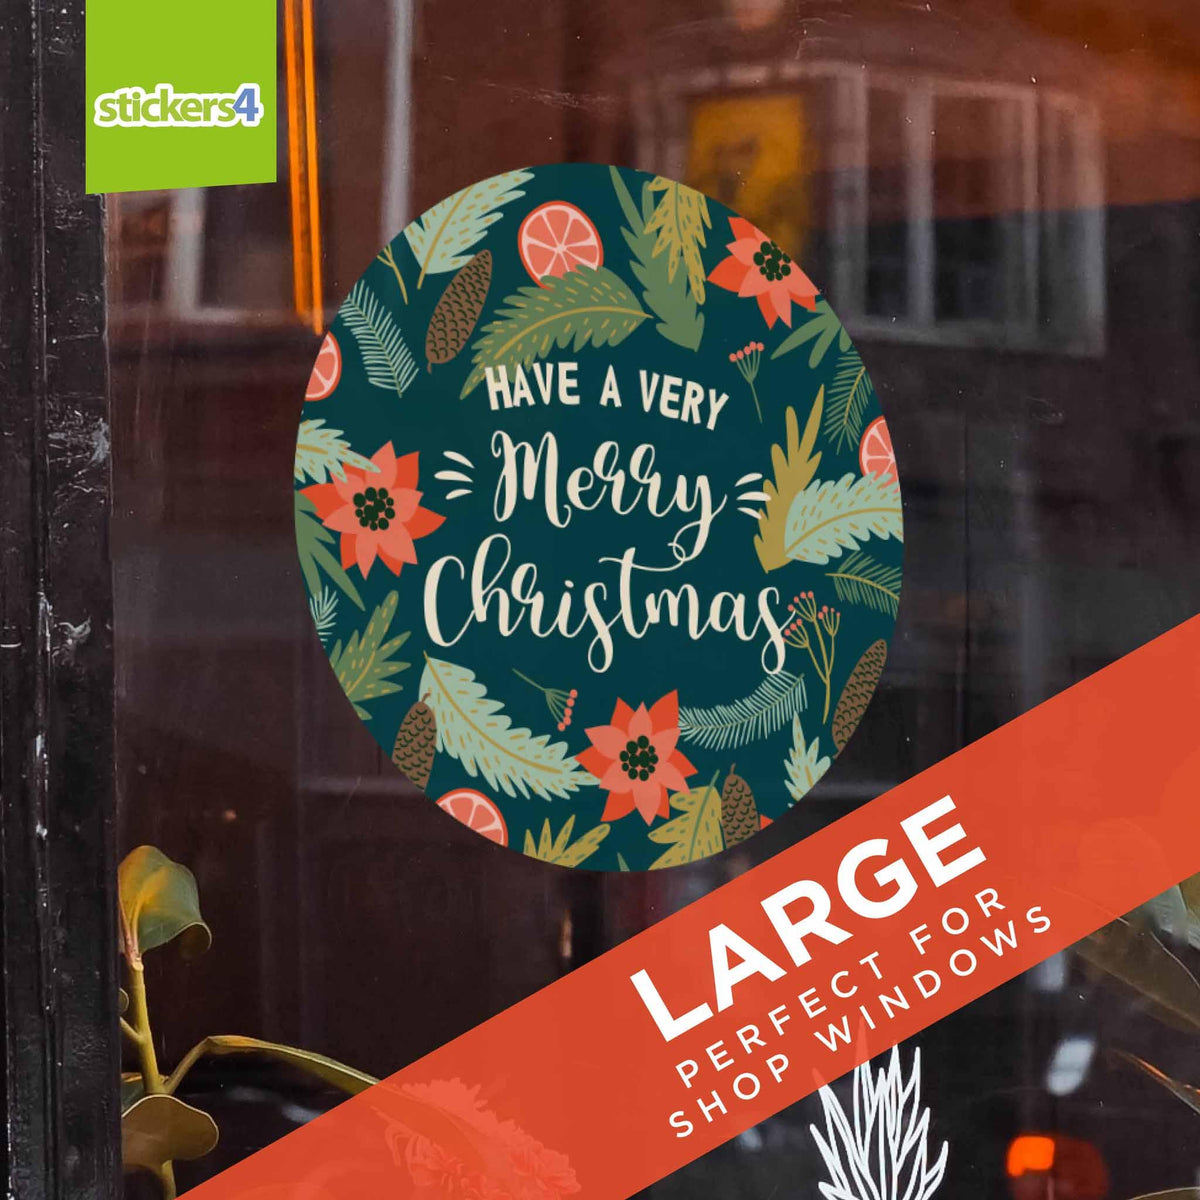 Have a Very Merry Christmas Roundel - Christmas Window Cling Christmas Window Display